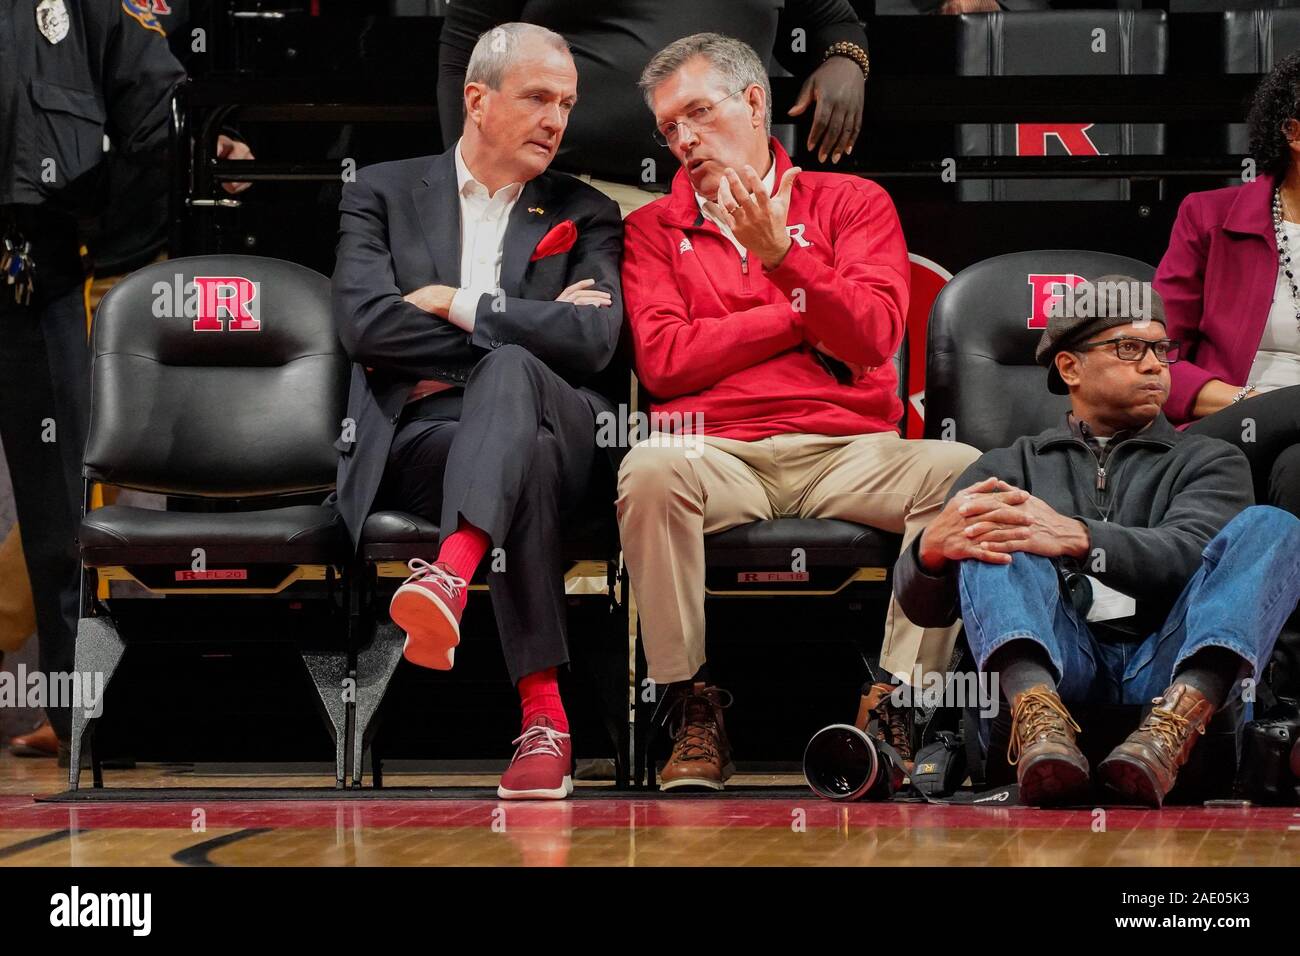 Piscataway, New Jersey, USA. 5th Dec, 2019. New Jersey Governor, PHIL MURPHY talks with Rutgers Director of Athletics, PAT HOBBS, at a Rutgers womenÃs basketball game at the Rutgers Athletic Center in Piscataway, New Jersey. Credit: Joel Plummer/ZUMA Wire/Alamy Live News Stock Photo